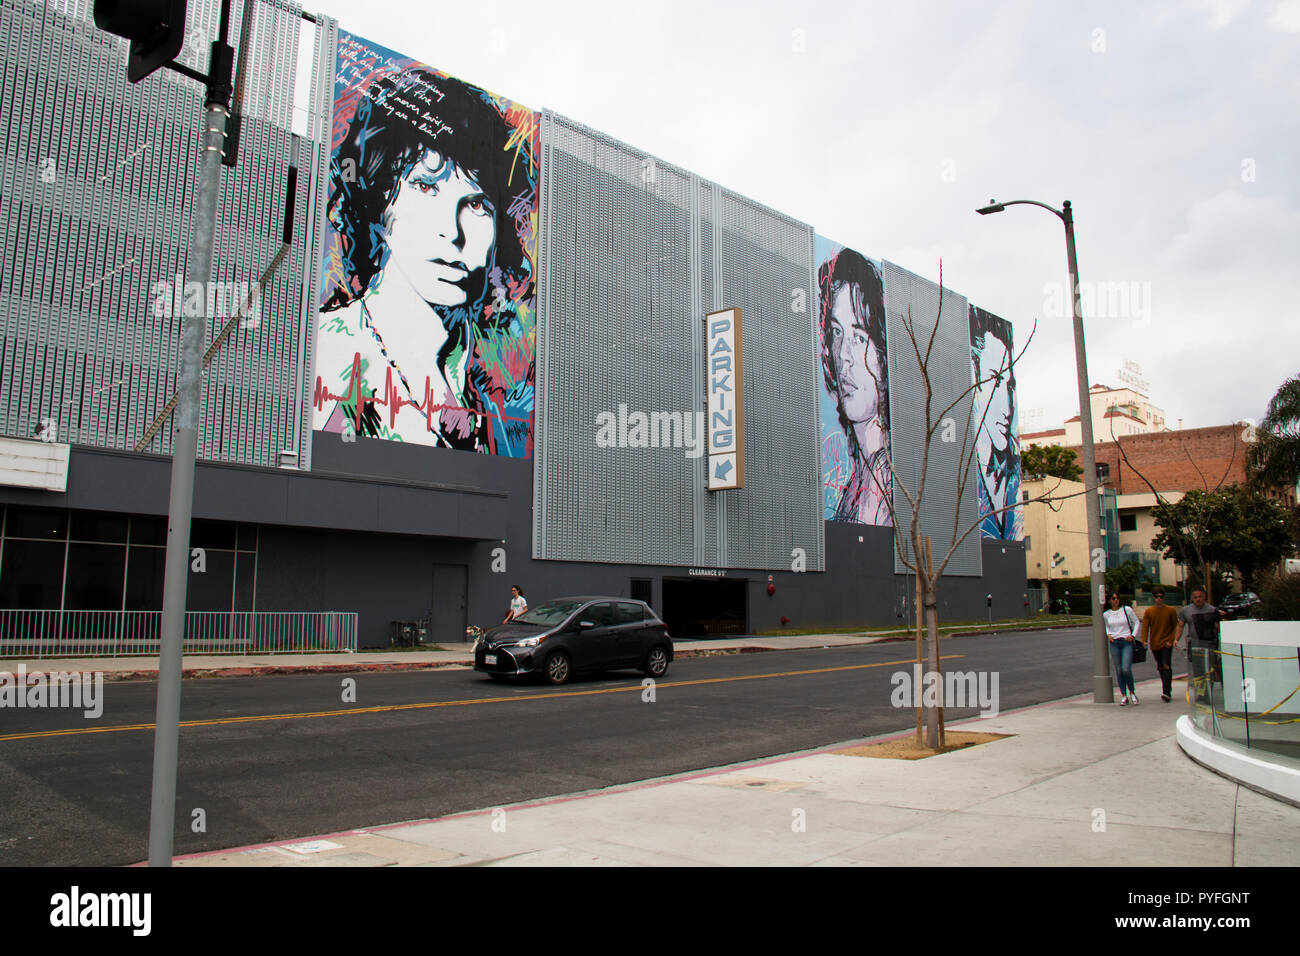 LOS ANGELES, USA – APRIL 2018: Street art near a parking lot in Los Angeles, USA around the corner of Hollywood Boulevard Stock Photo